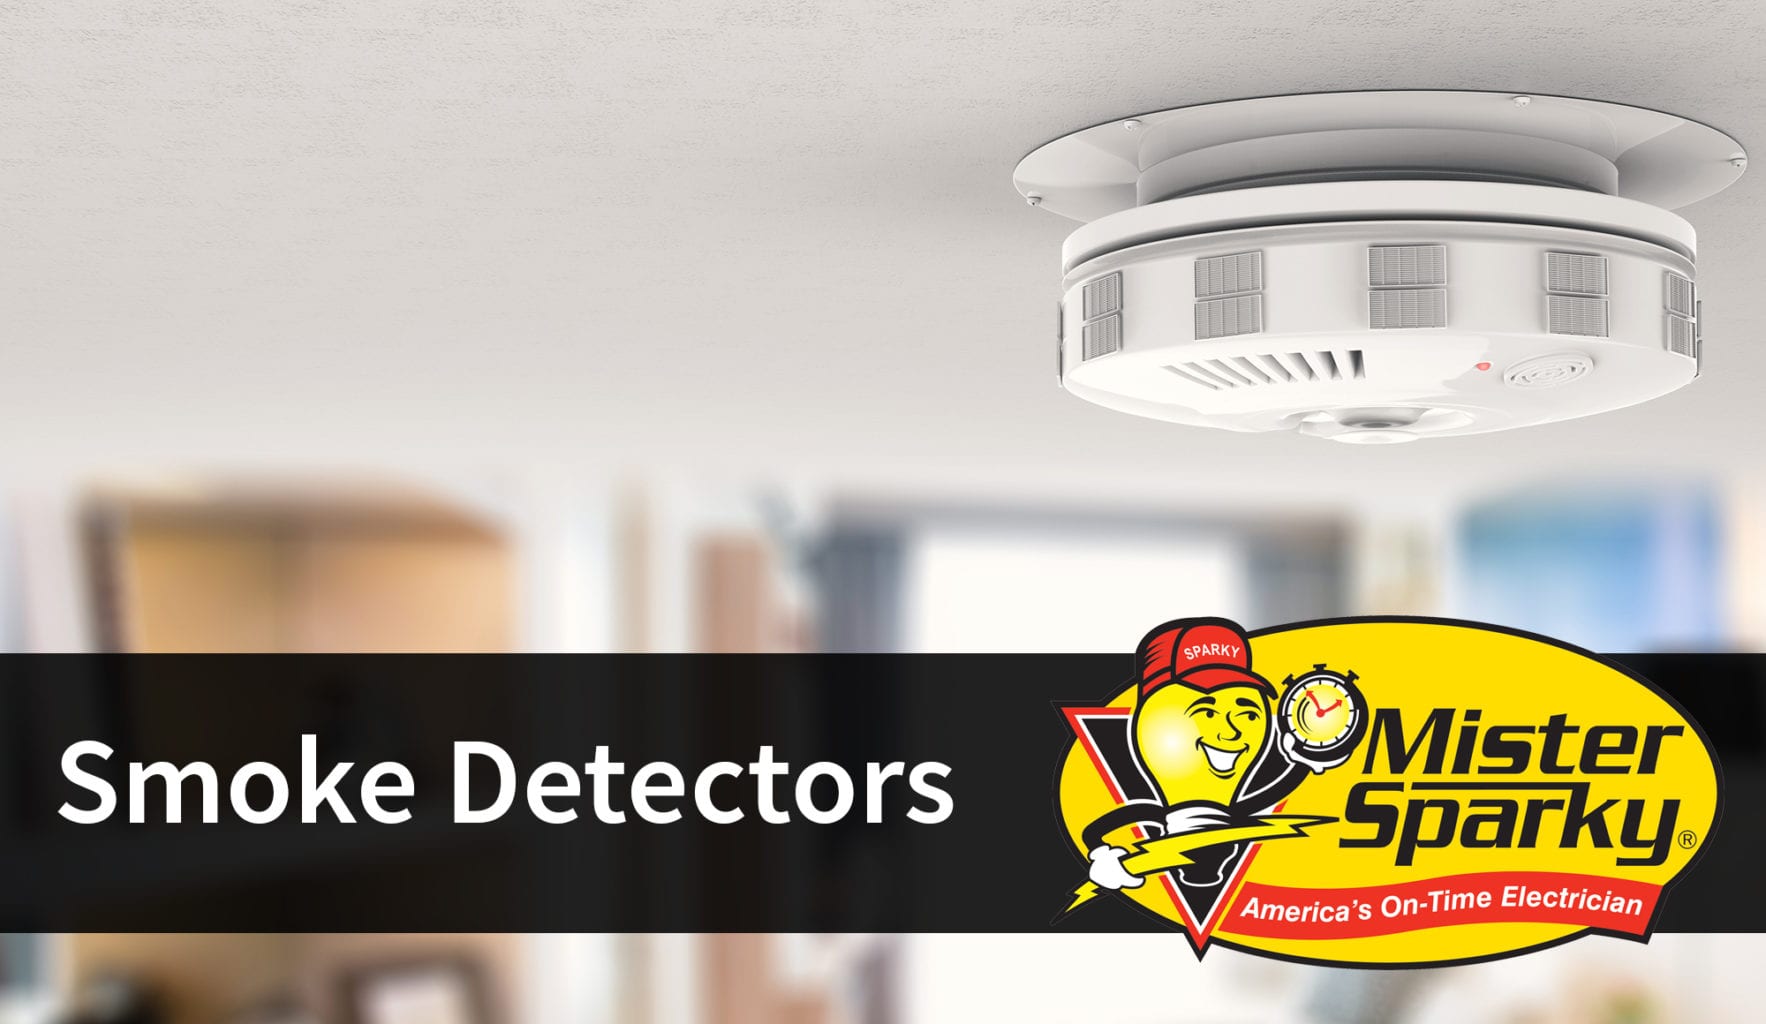 Mister Sparky Oklahoma City can help with smoke detector maintenance.